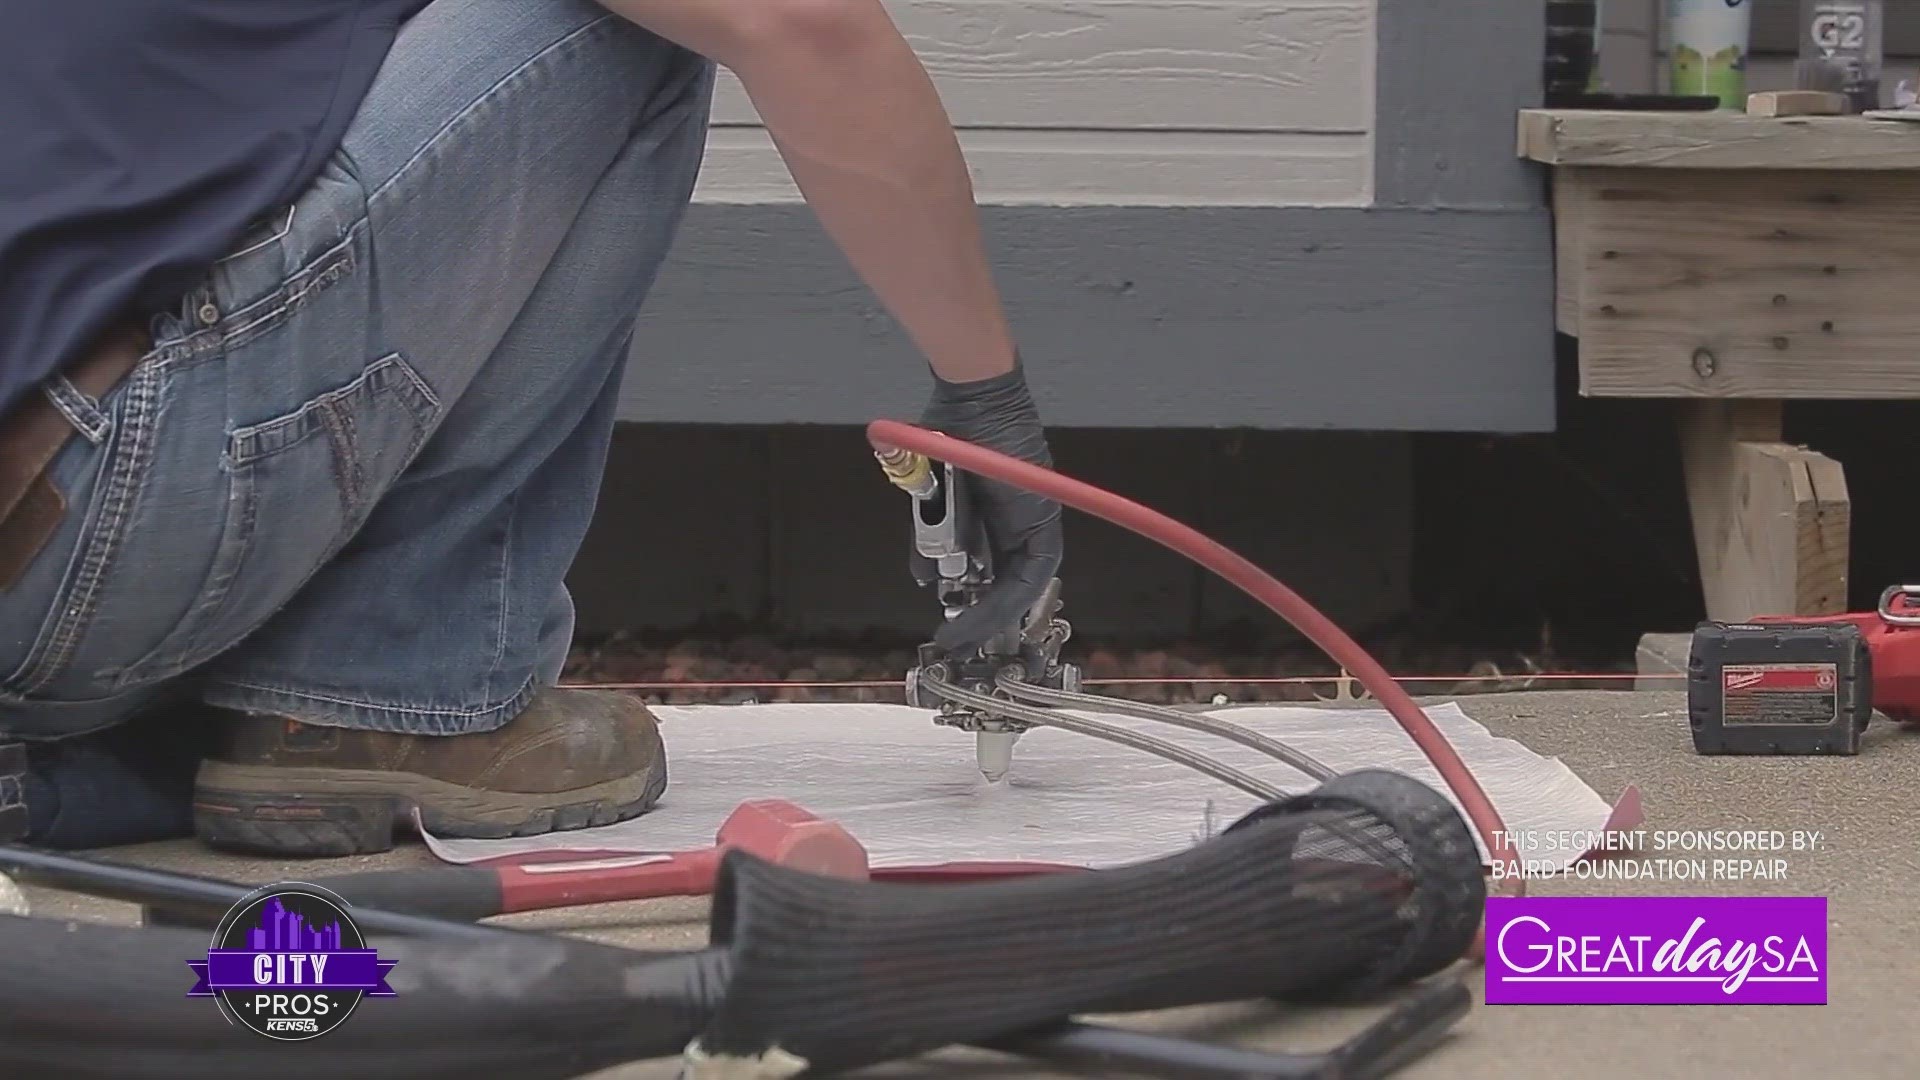 Benefits of fixing your home foundation & driveways. [Sponsored by: Baird Foundation Repair]